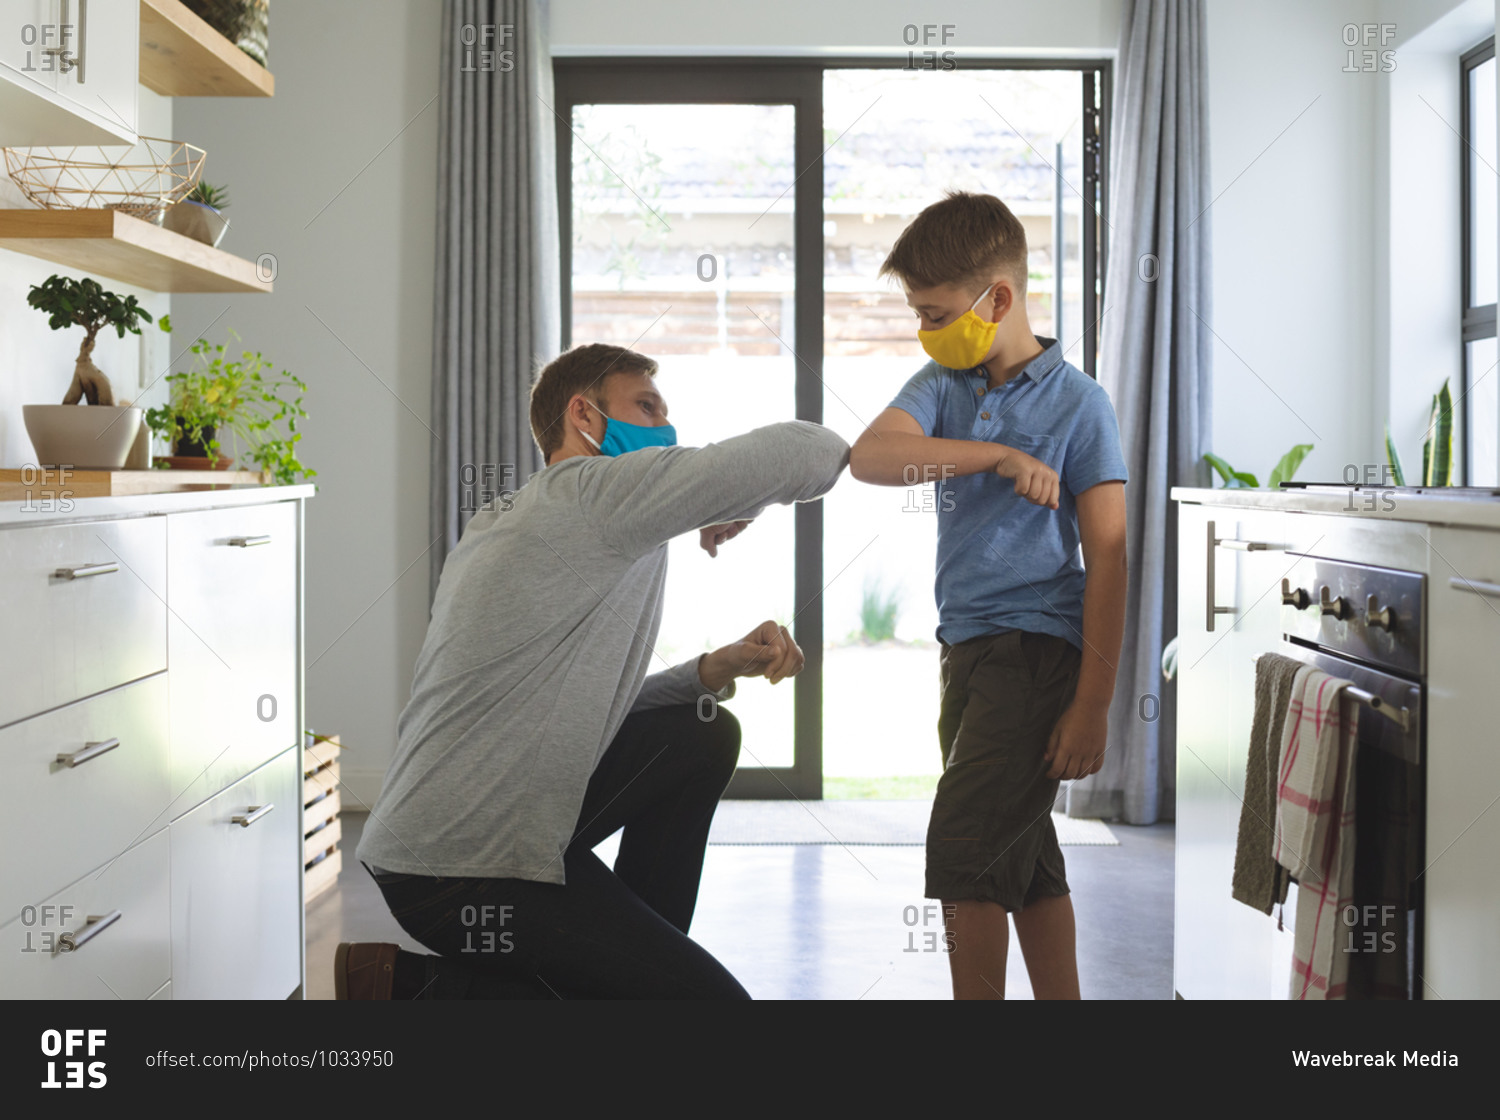 Caucasian man at home with his son, in kitchen, wearing face masks, greeting touching elbows. Social distancing during Covid 19 Coronavirus quarantine lockdown.